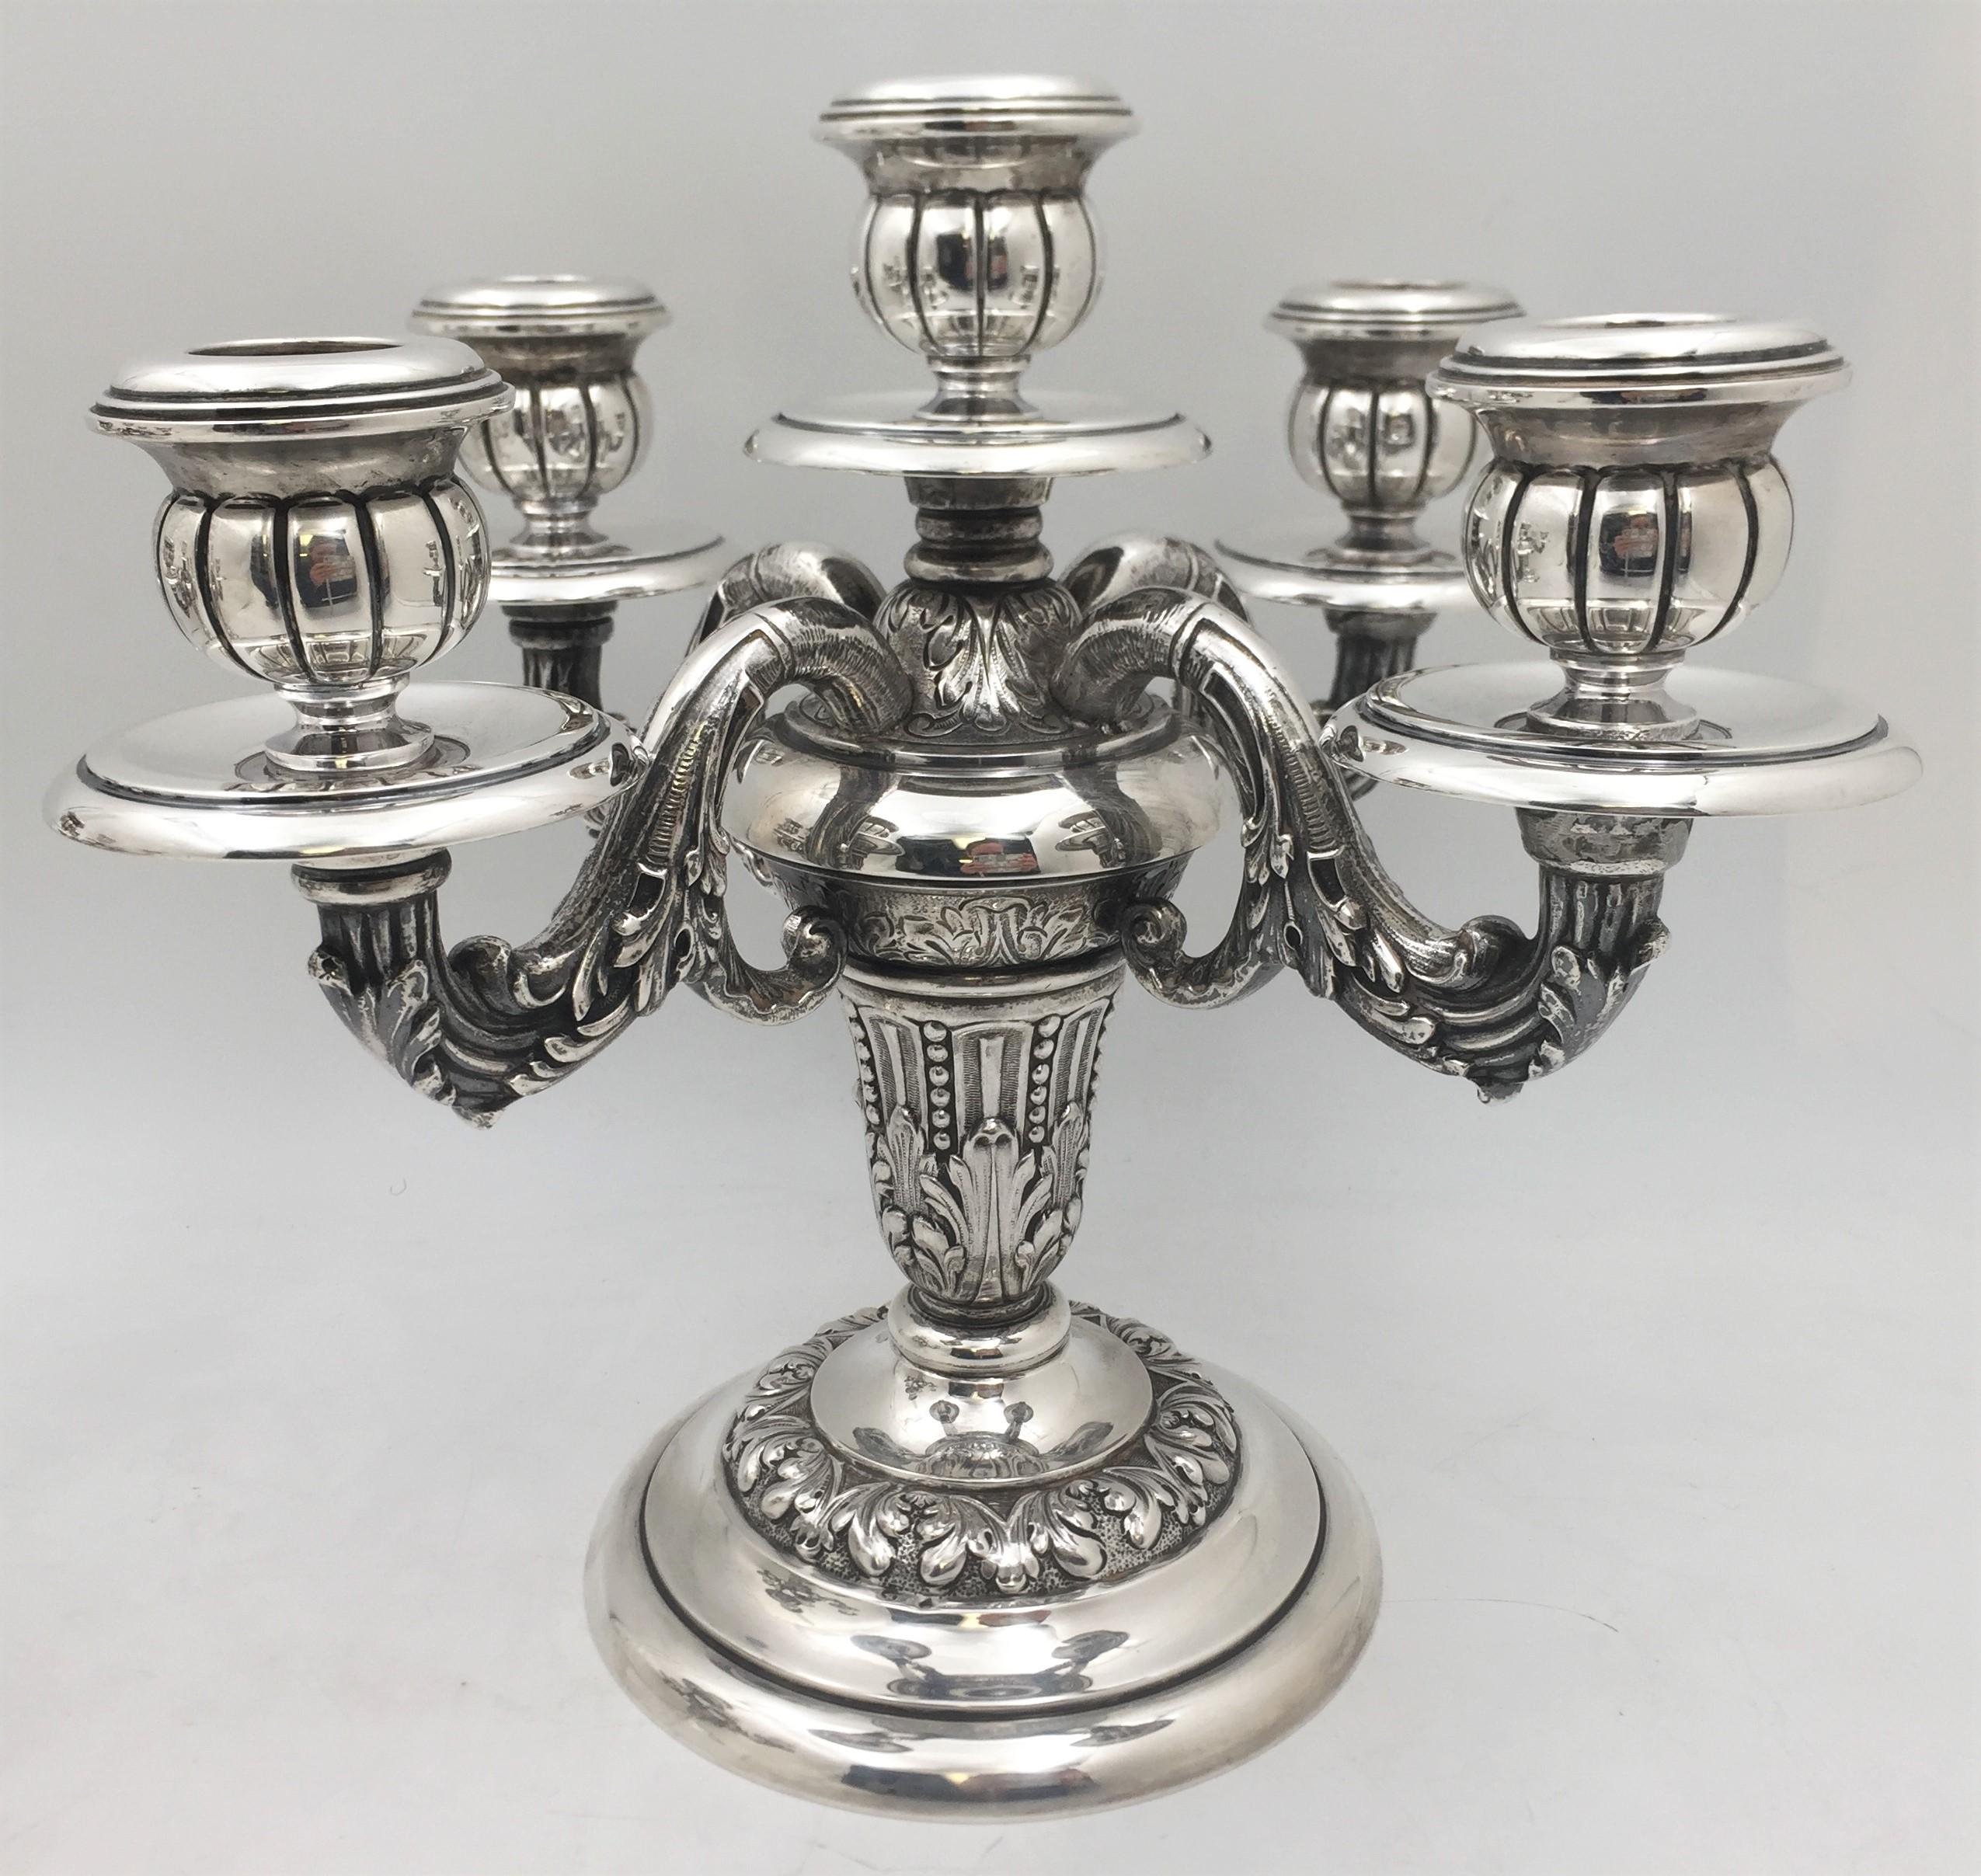 Pair of Portuguese Silver 5-Light Ornate Candelabra In Good Condition For Sale In New York, NY